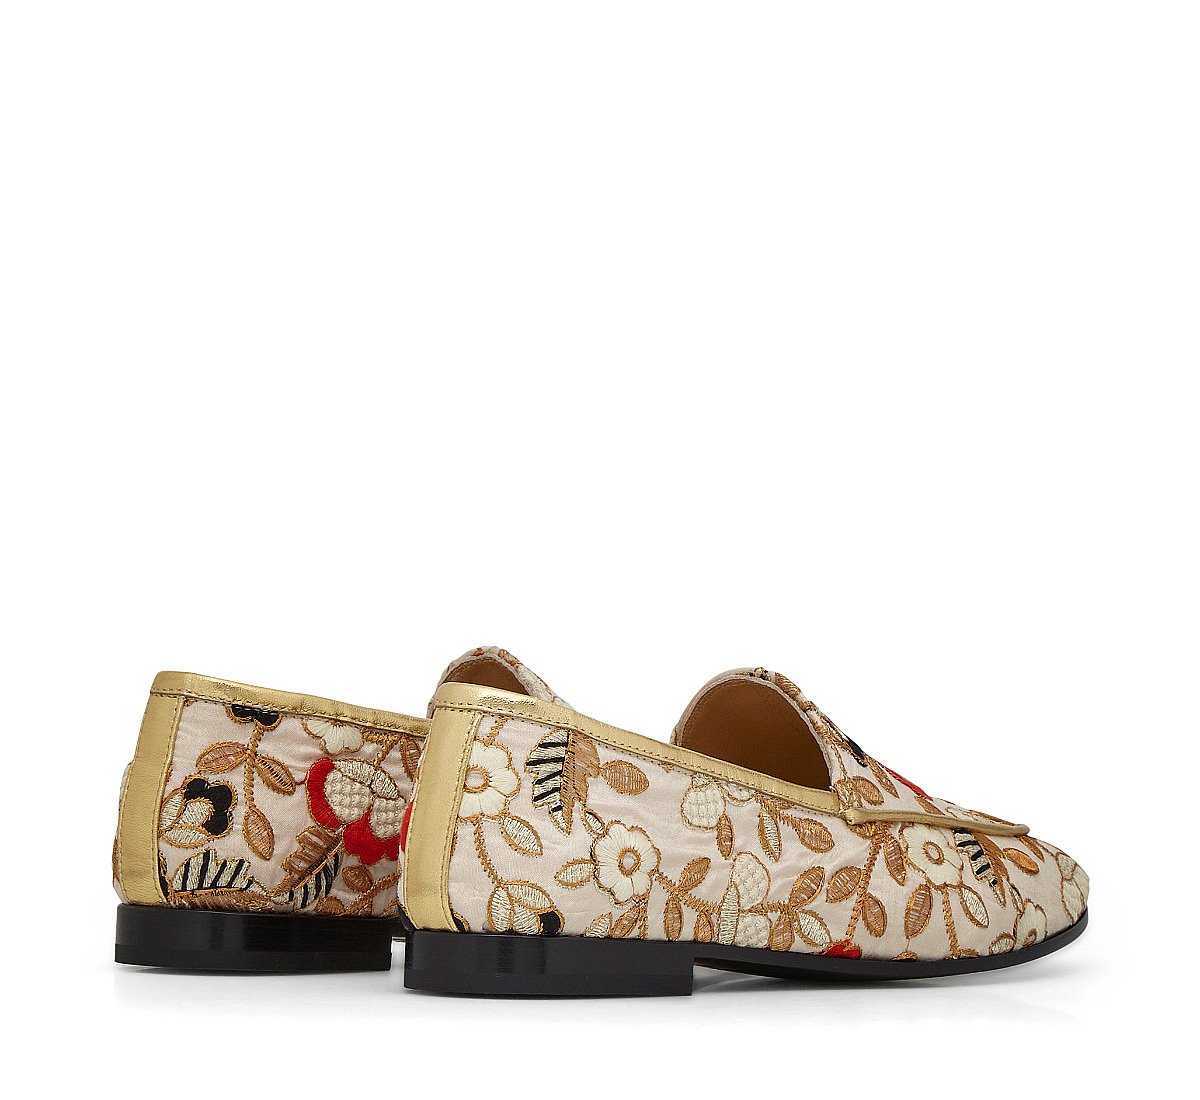 Loafer in exquisite fabric